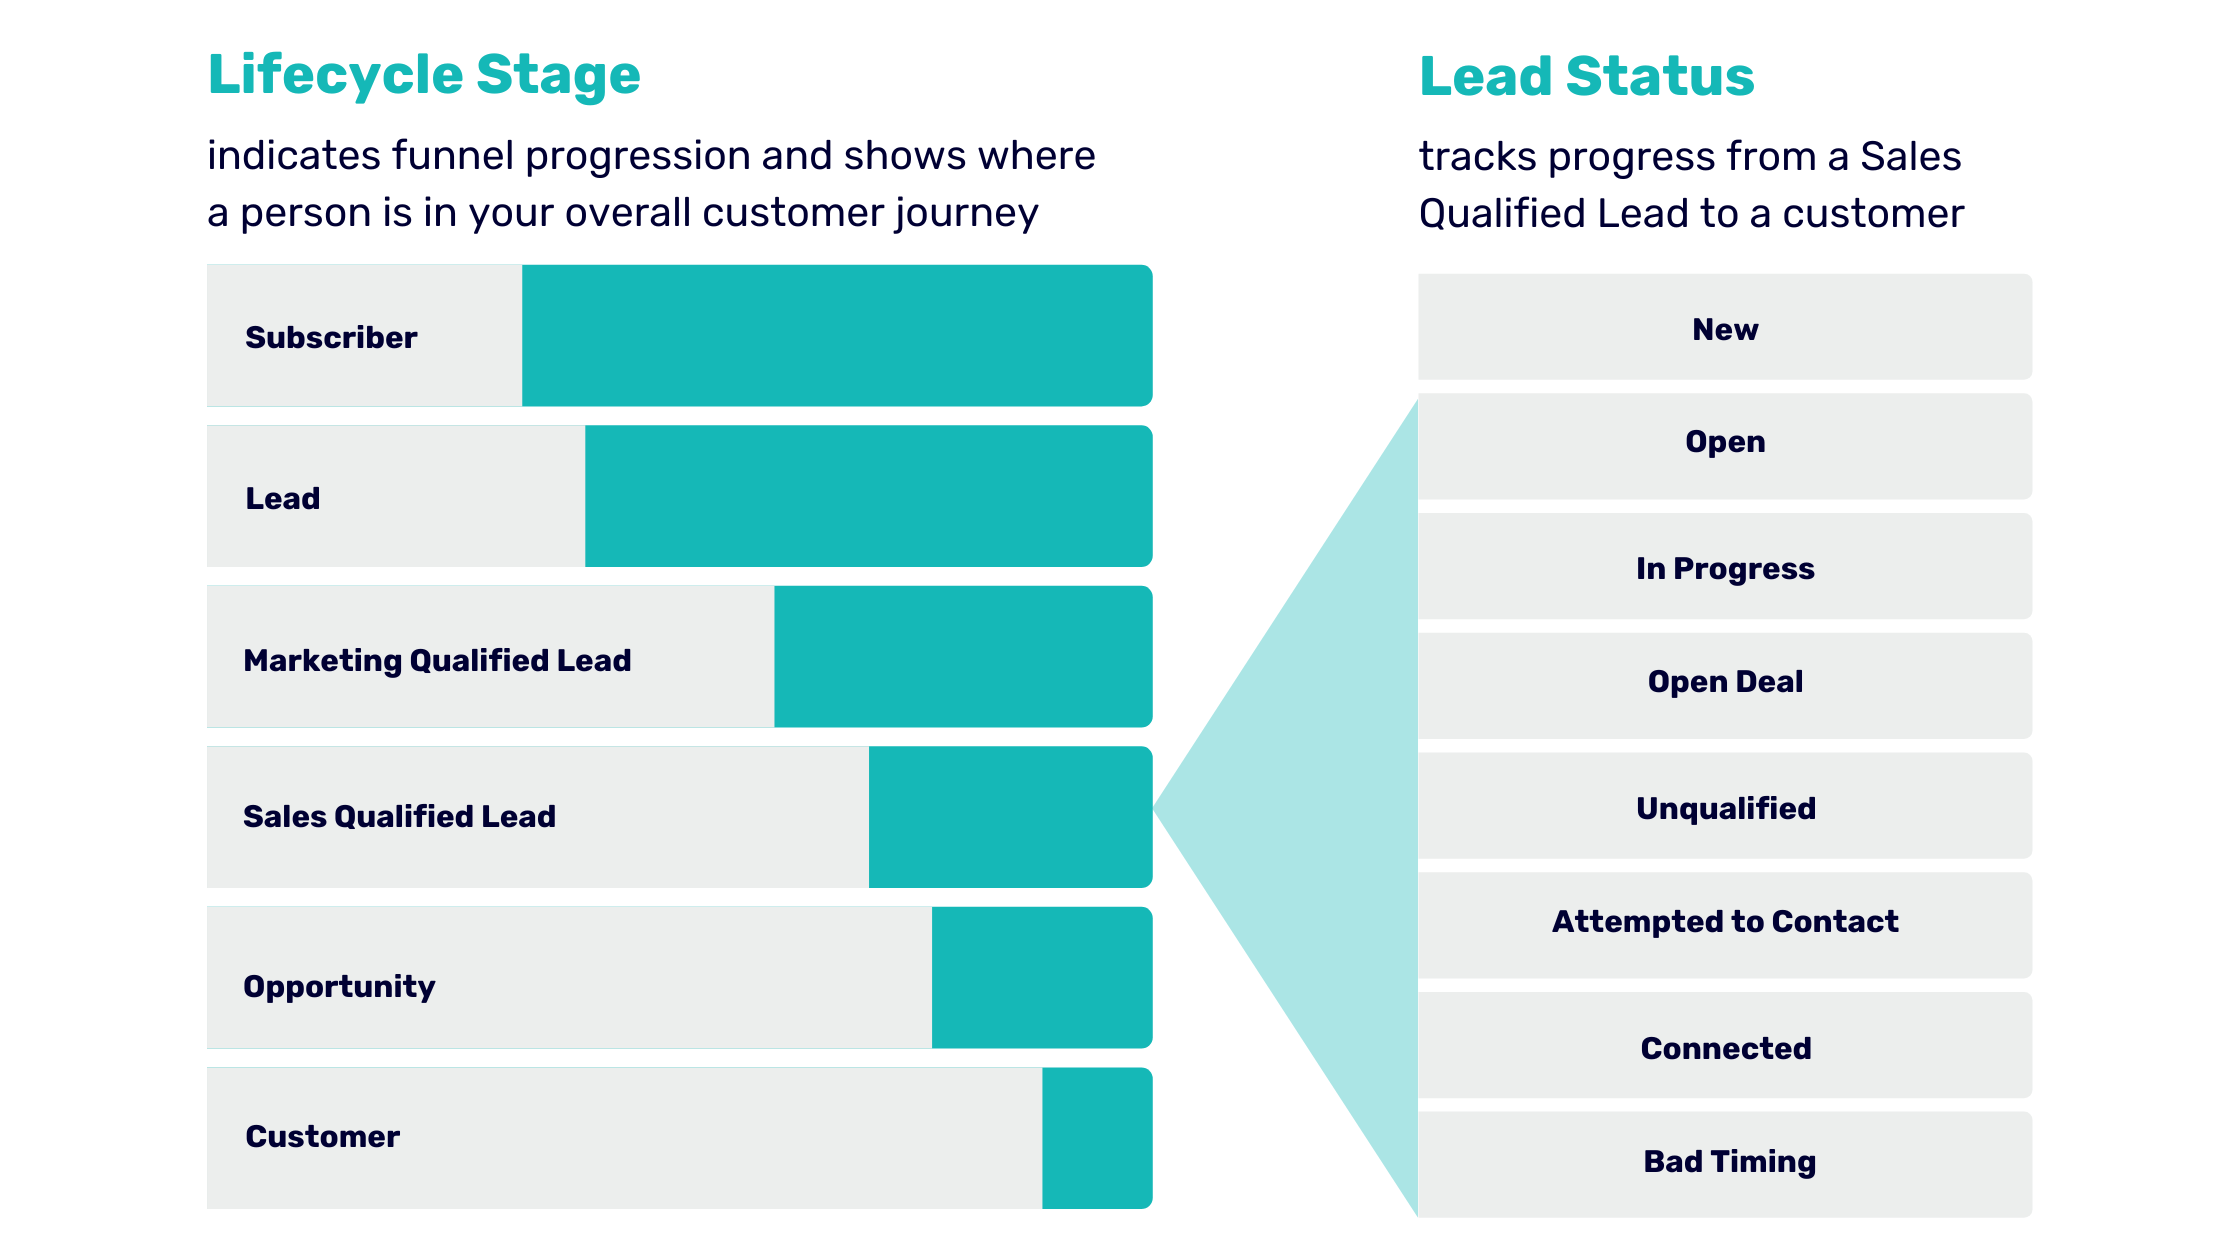 Lead Status as a breakdown of the Sales Qualified Lead Lifecycle Stage